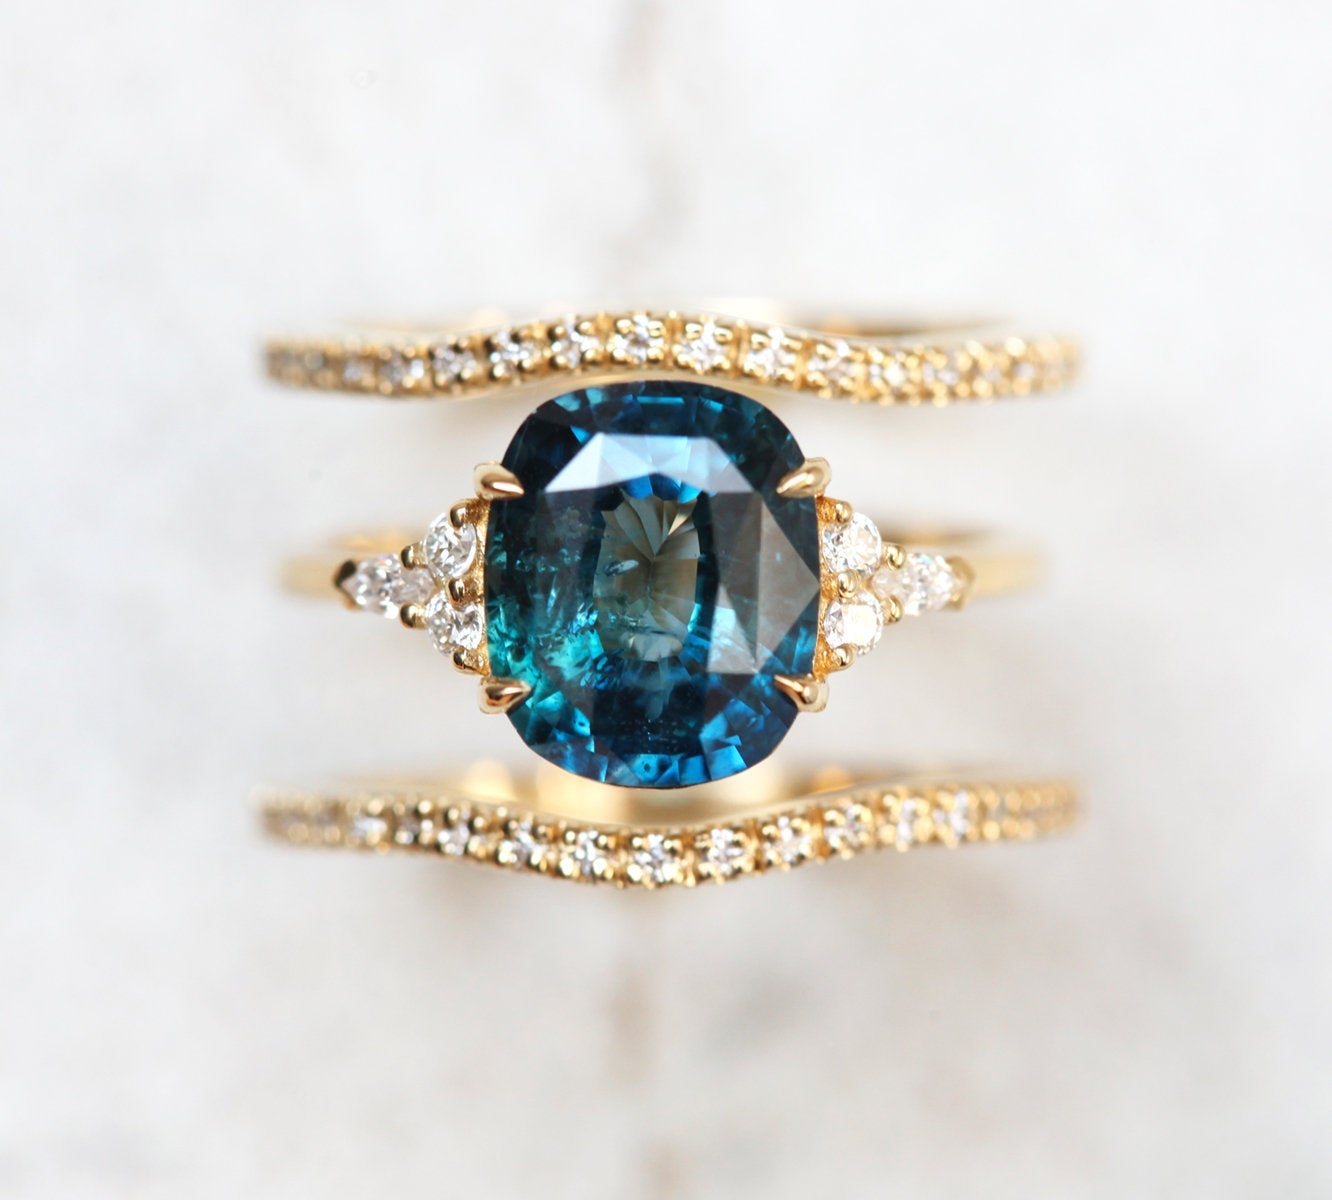 Cushion-cut blue green sapphire cluster ring with diamonds